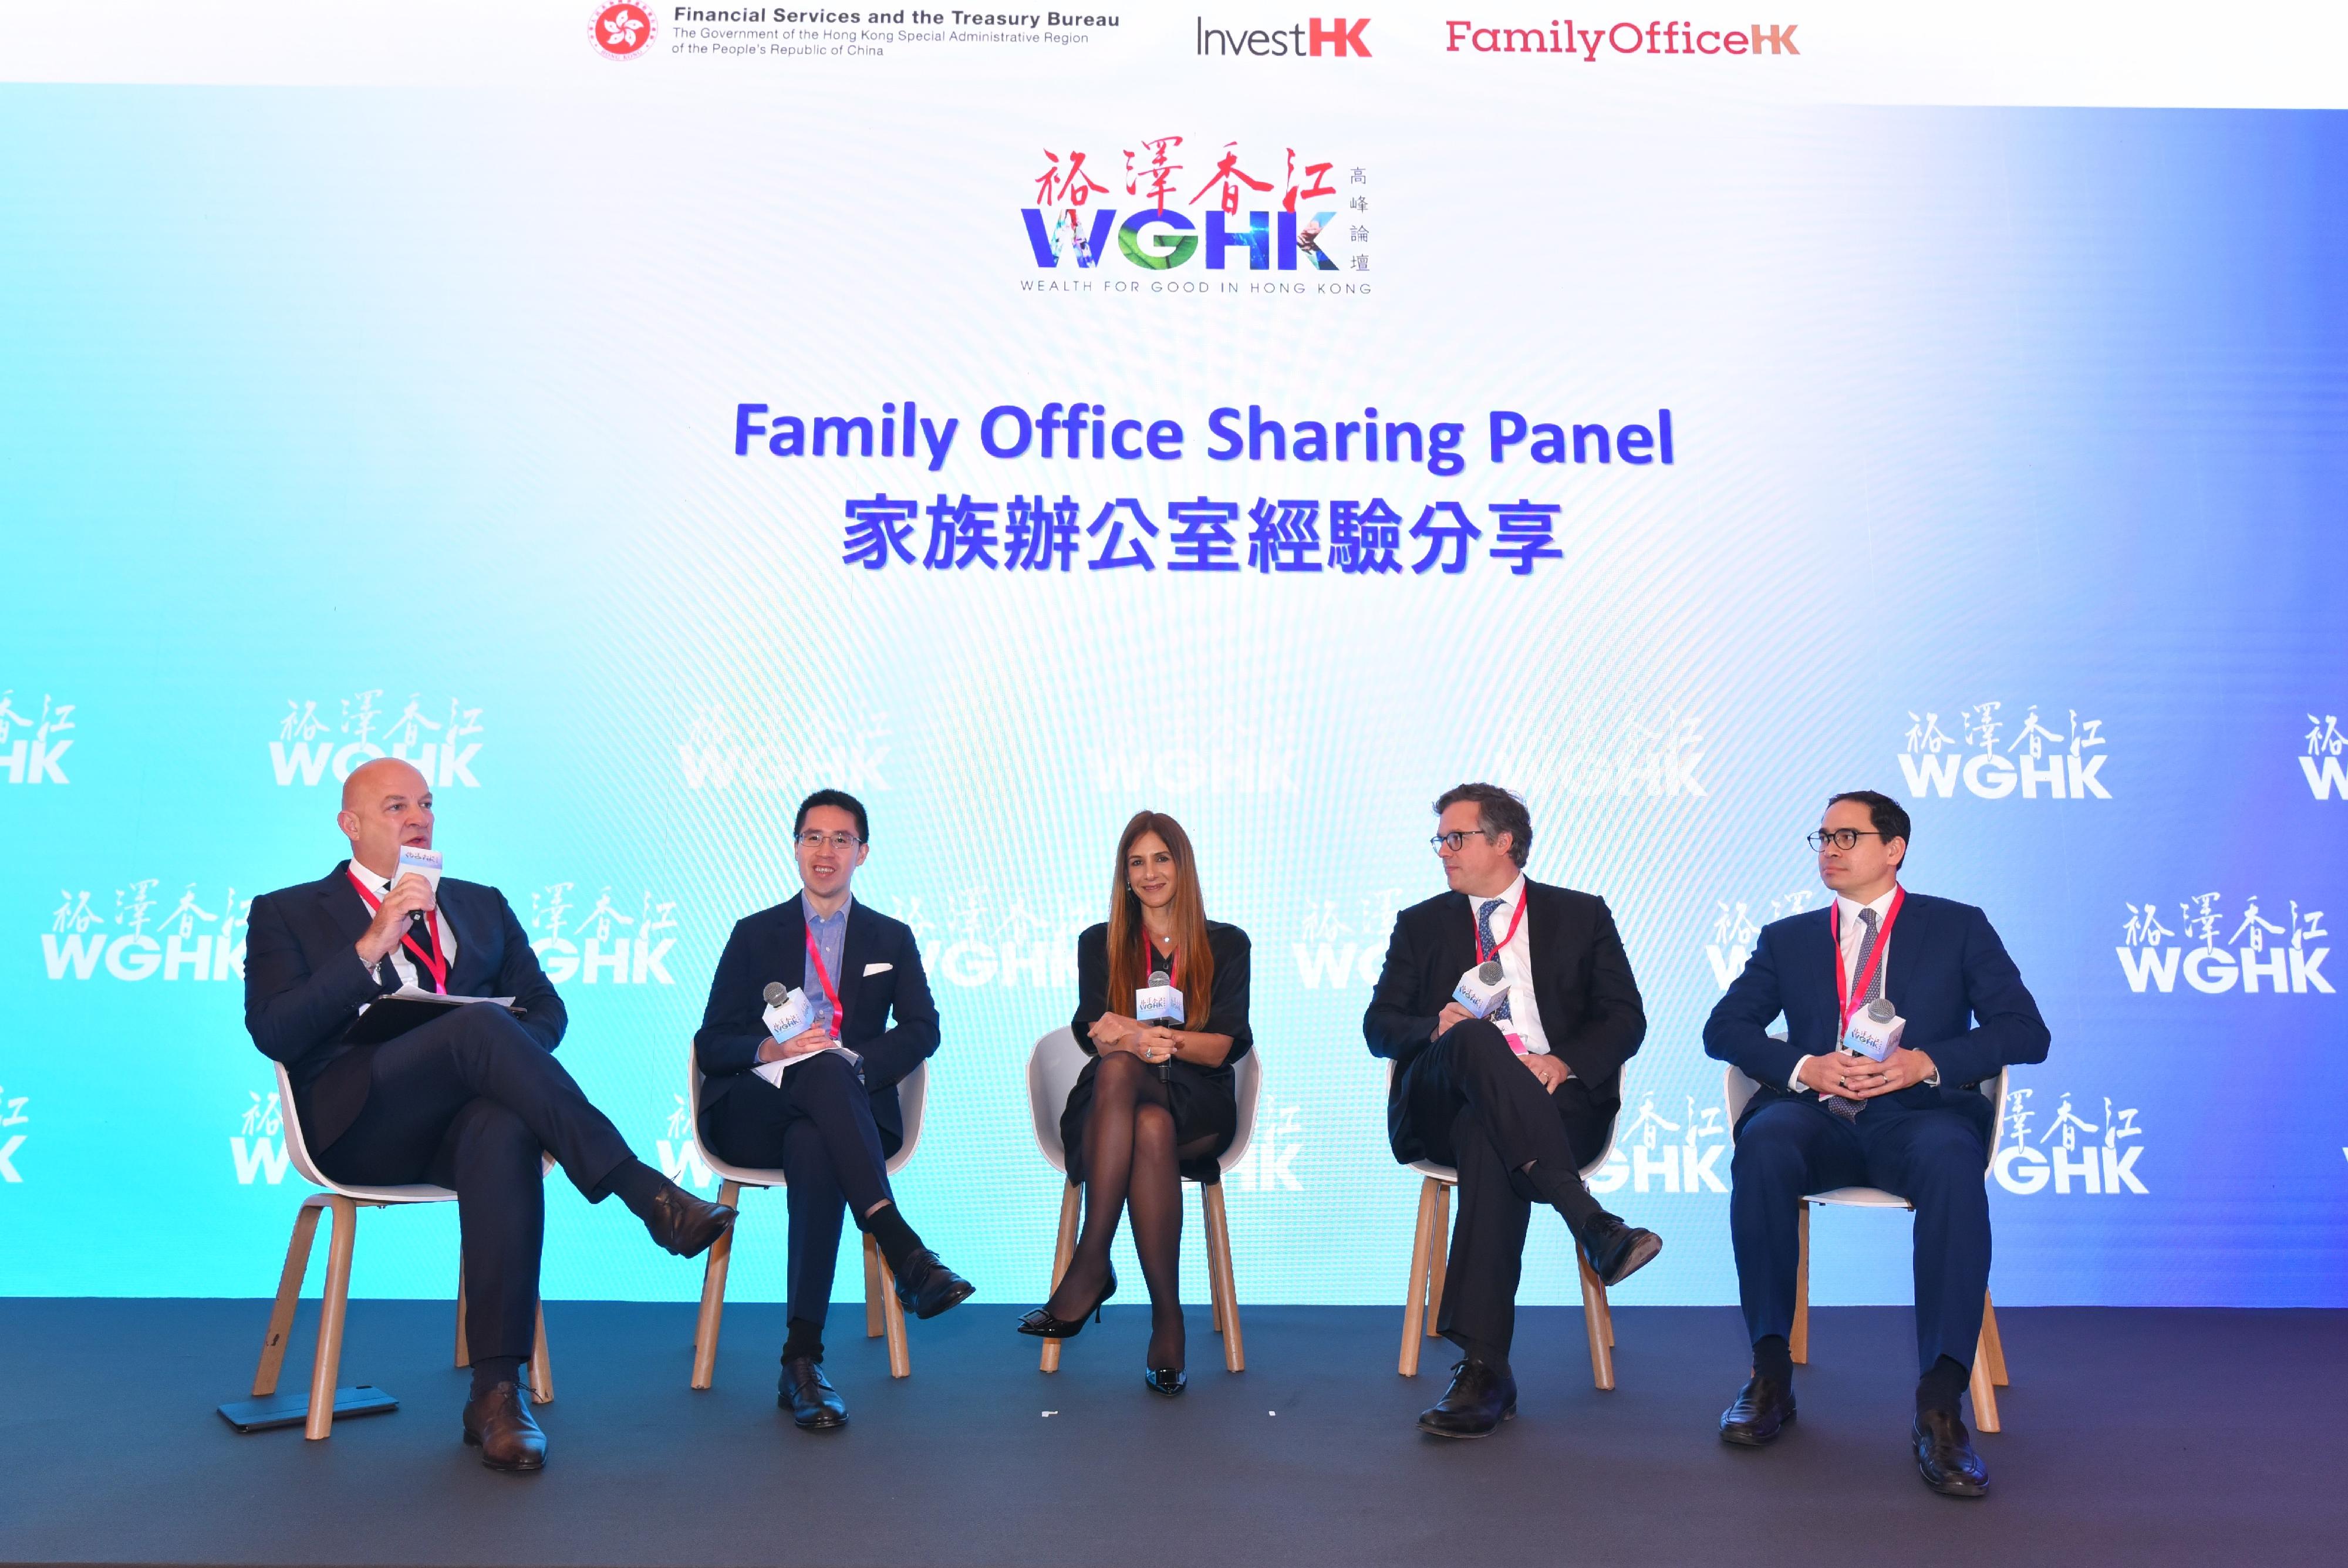 In the Family Office Sharing Panel of the Wealth for Good in Hong Kong Summit moderated by the Executive Chairman of Global Private Bank of J.P. Morgan, Mr Andrew Cohen, speakers today (March 24) shared their insights on changing priorities and needs of family offices, plus the unique advantages Hong Kong has to offer for global family offices. Panel speakers (from left to right): Mr Cohen; the Executive Director of Sun Hung Kai Properties Limited, Mr Adam Kwok; the Chairman and CEO of Arison Investments, Ms Efrat Peled; the Chairman and CEO of Sagard, Mr Paul Desmarais III; and the Founder and CEO of Kiri Capital, Mr Philip Sohmen. 